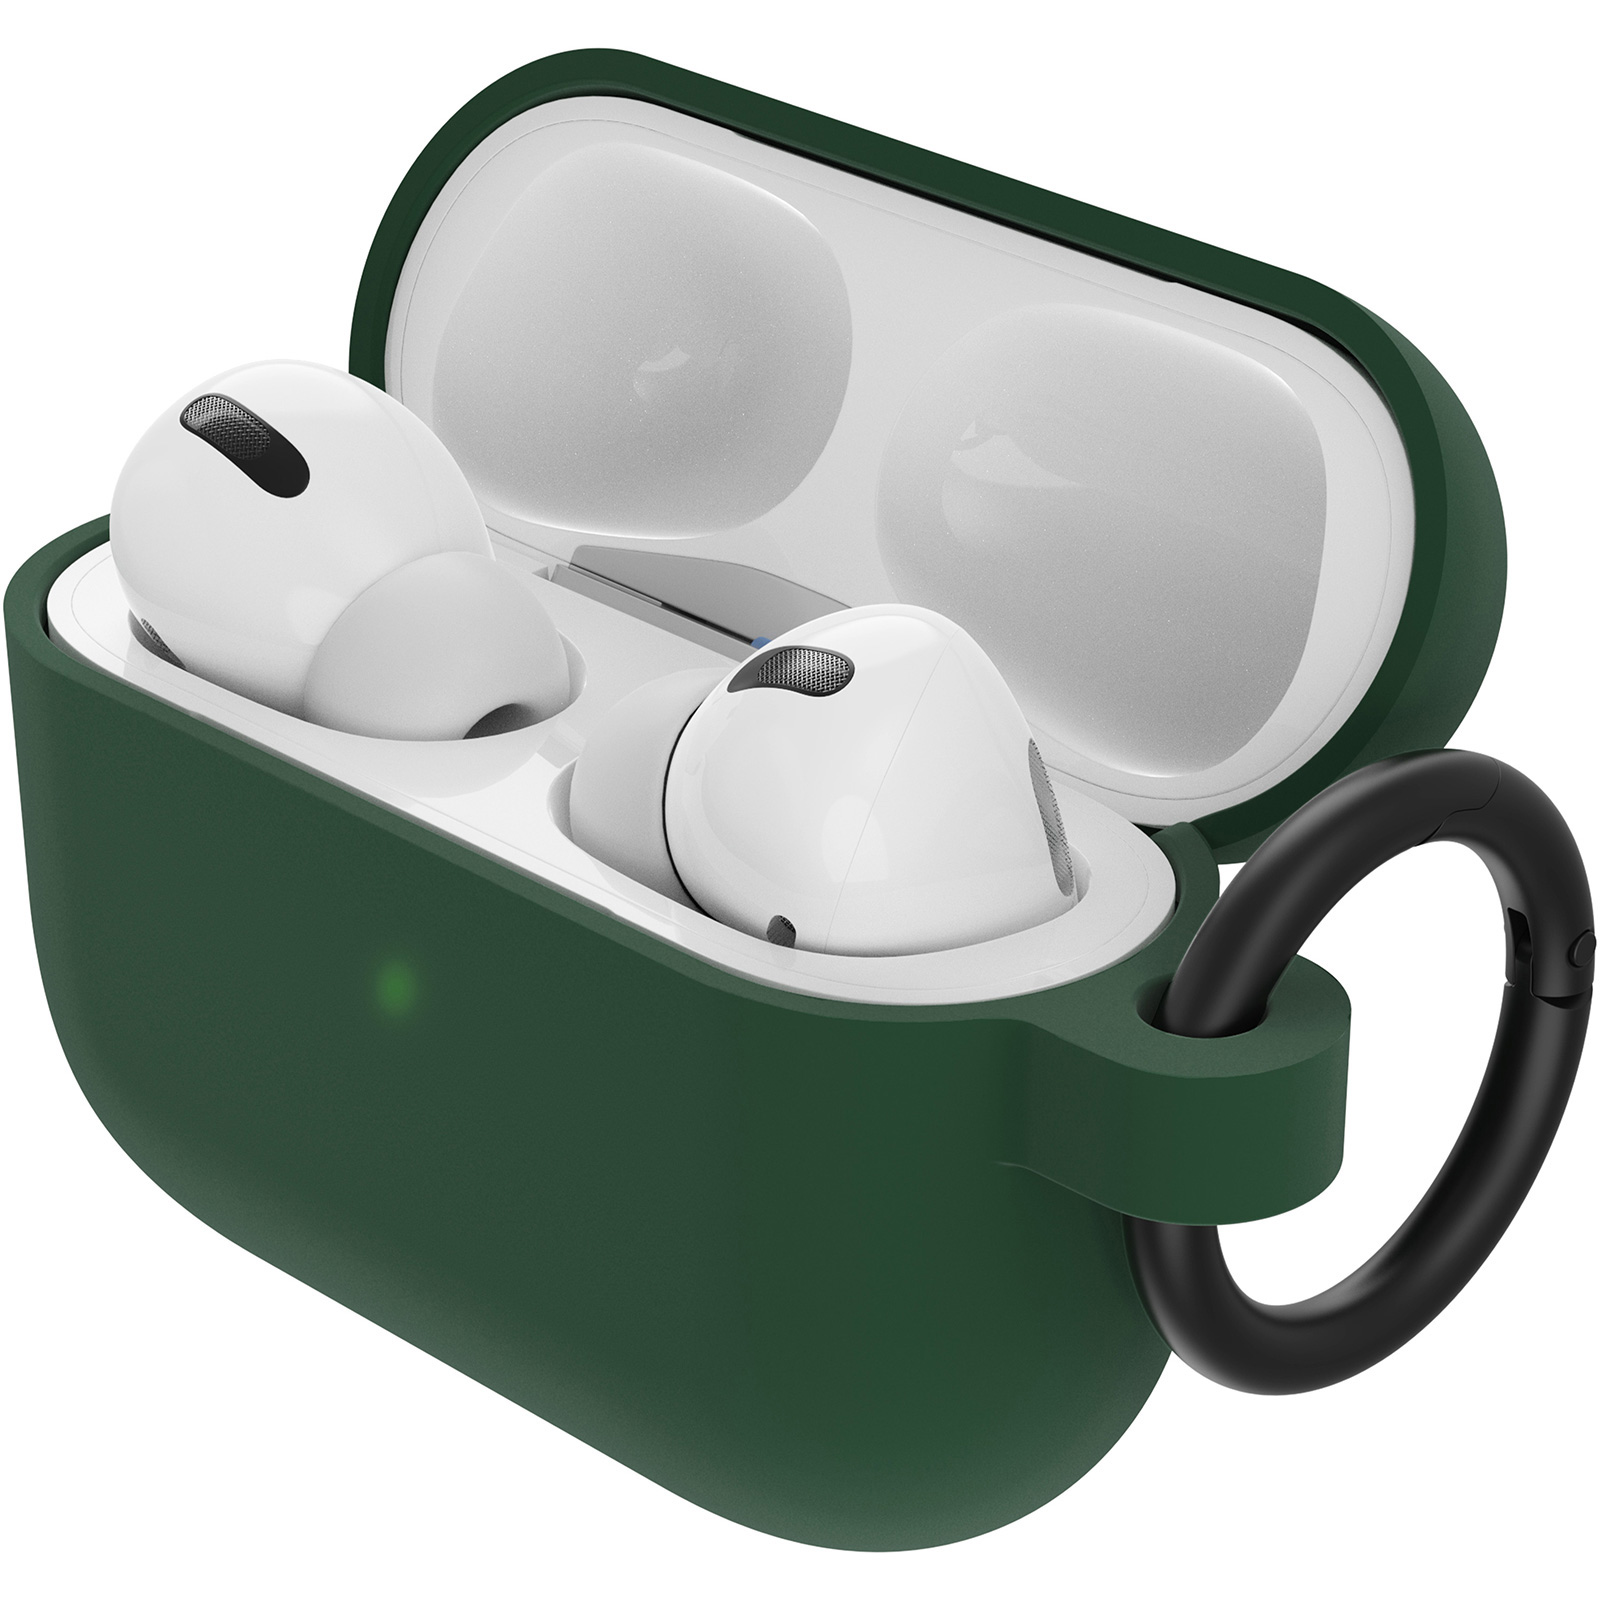 Otterbox Case for Apple AirPods Pro